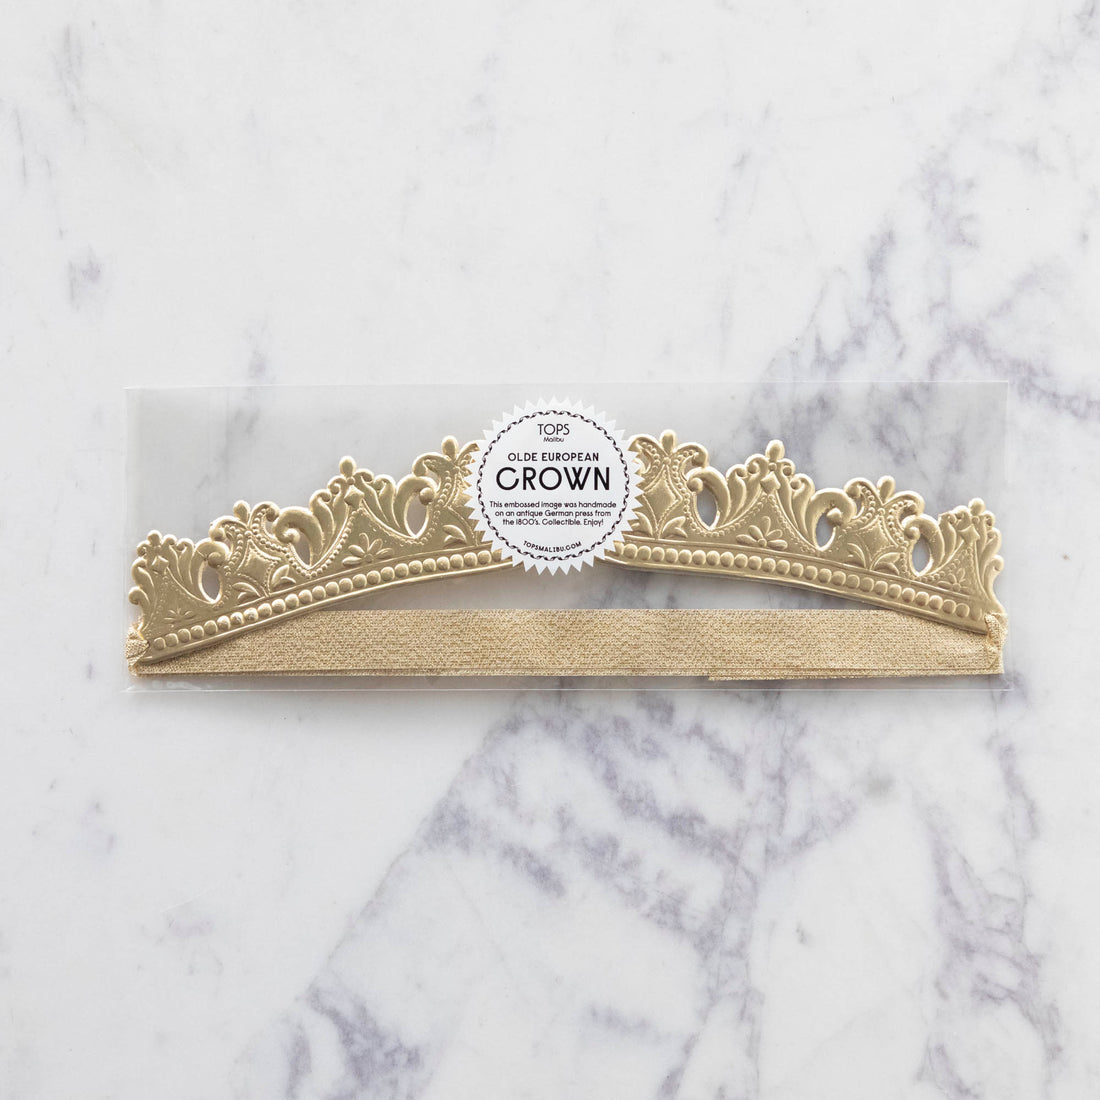 Three Crown Embossed Gold tiaras with a royal touch on a marble table by Tops Malibu.